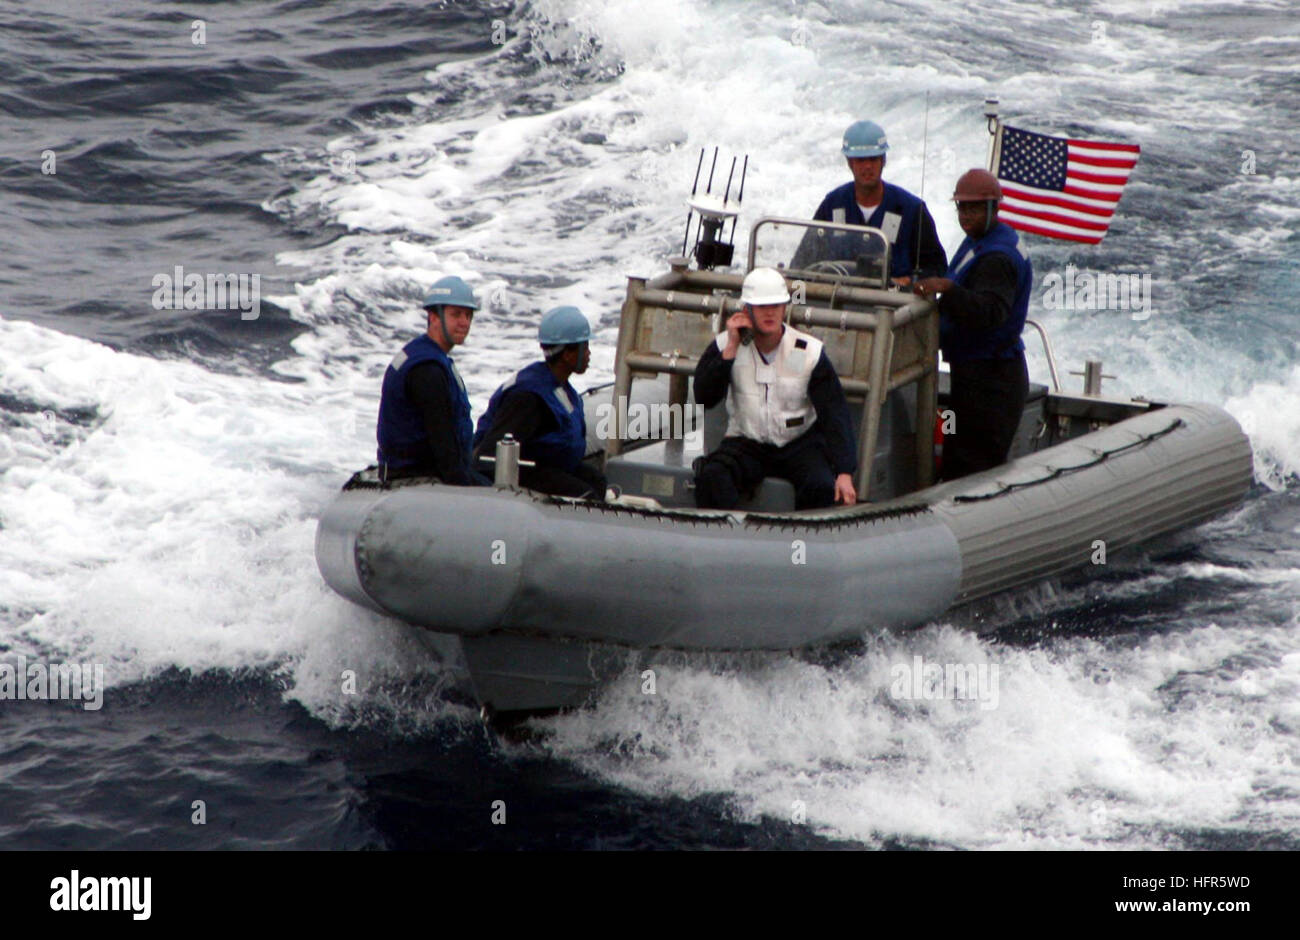 060509-N-0191T-036 Atlantic Ocean (May 9, 2006) - A rescue team assigned to the amphibious transport dock ship USS San Antonio (LPD 17) return the ship after provided assistance to a recreational boat. The rescue team led by Boat Officer Lt.j.g. Charles Spivey provided assistance to the recreational boat Denise Marie after receiving a distress call. San Antonio was transiting back to her homeport Norfolk, Va., after attending Fleet Week USA 2006 in Ft. Lauderdale, Fla.  U.S. Navy photo by Journalist 3rd Class Anthony C. Tornetta (RELEASED) US Navy 060509-N-0191T-036 Photo approved for release  Stock Photo